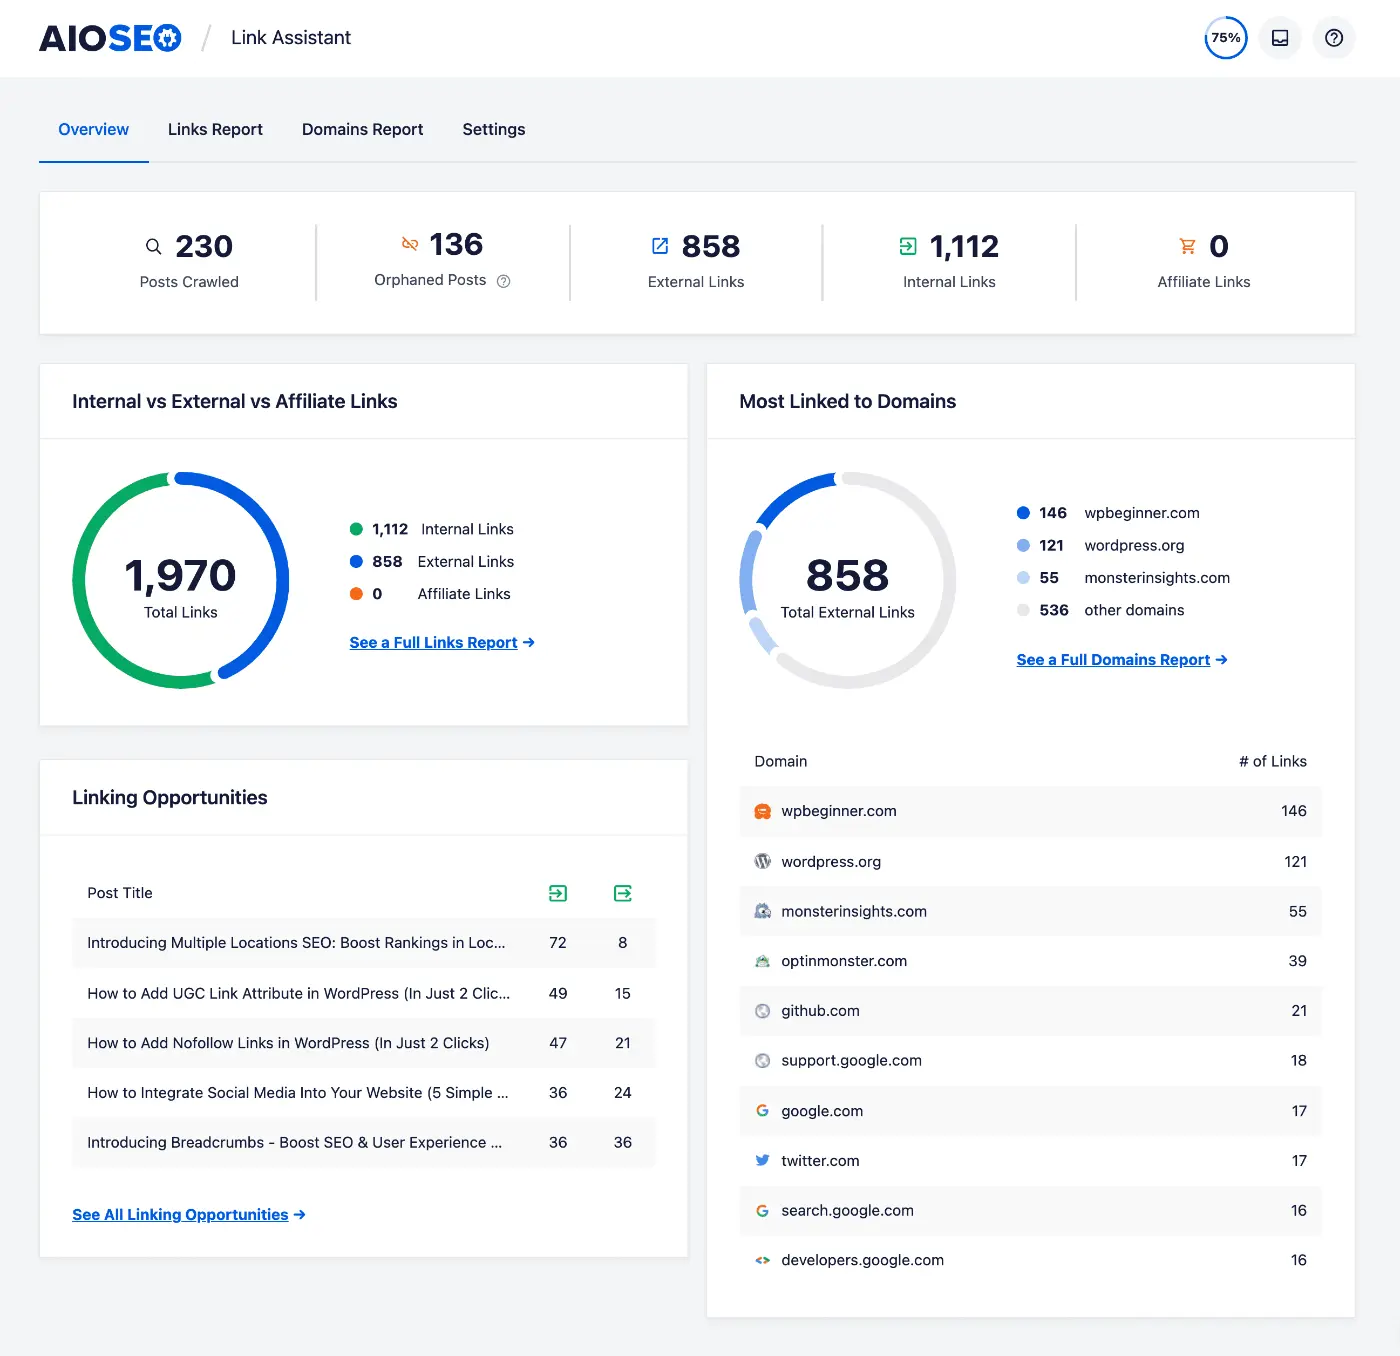 AIOSEO-Link-Assistant-for-SEO-Basics